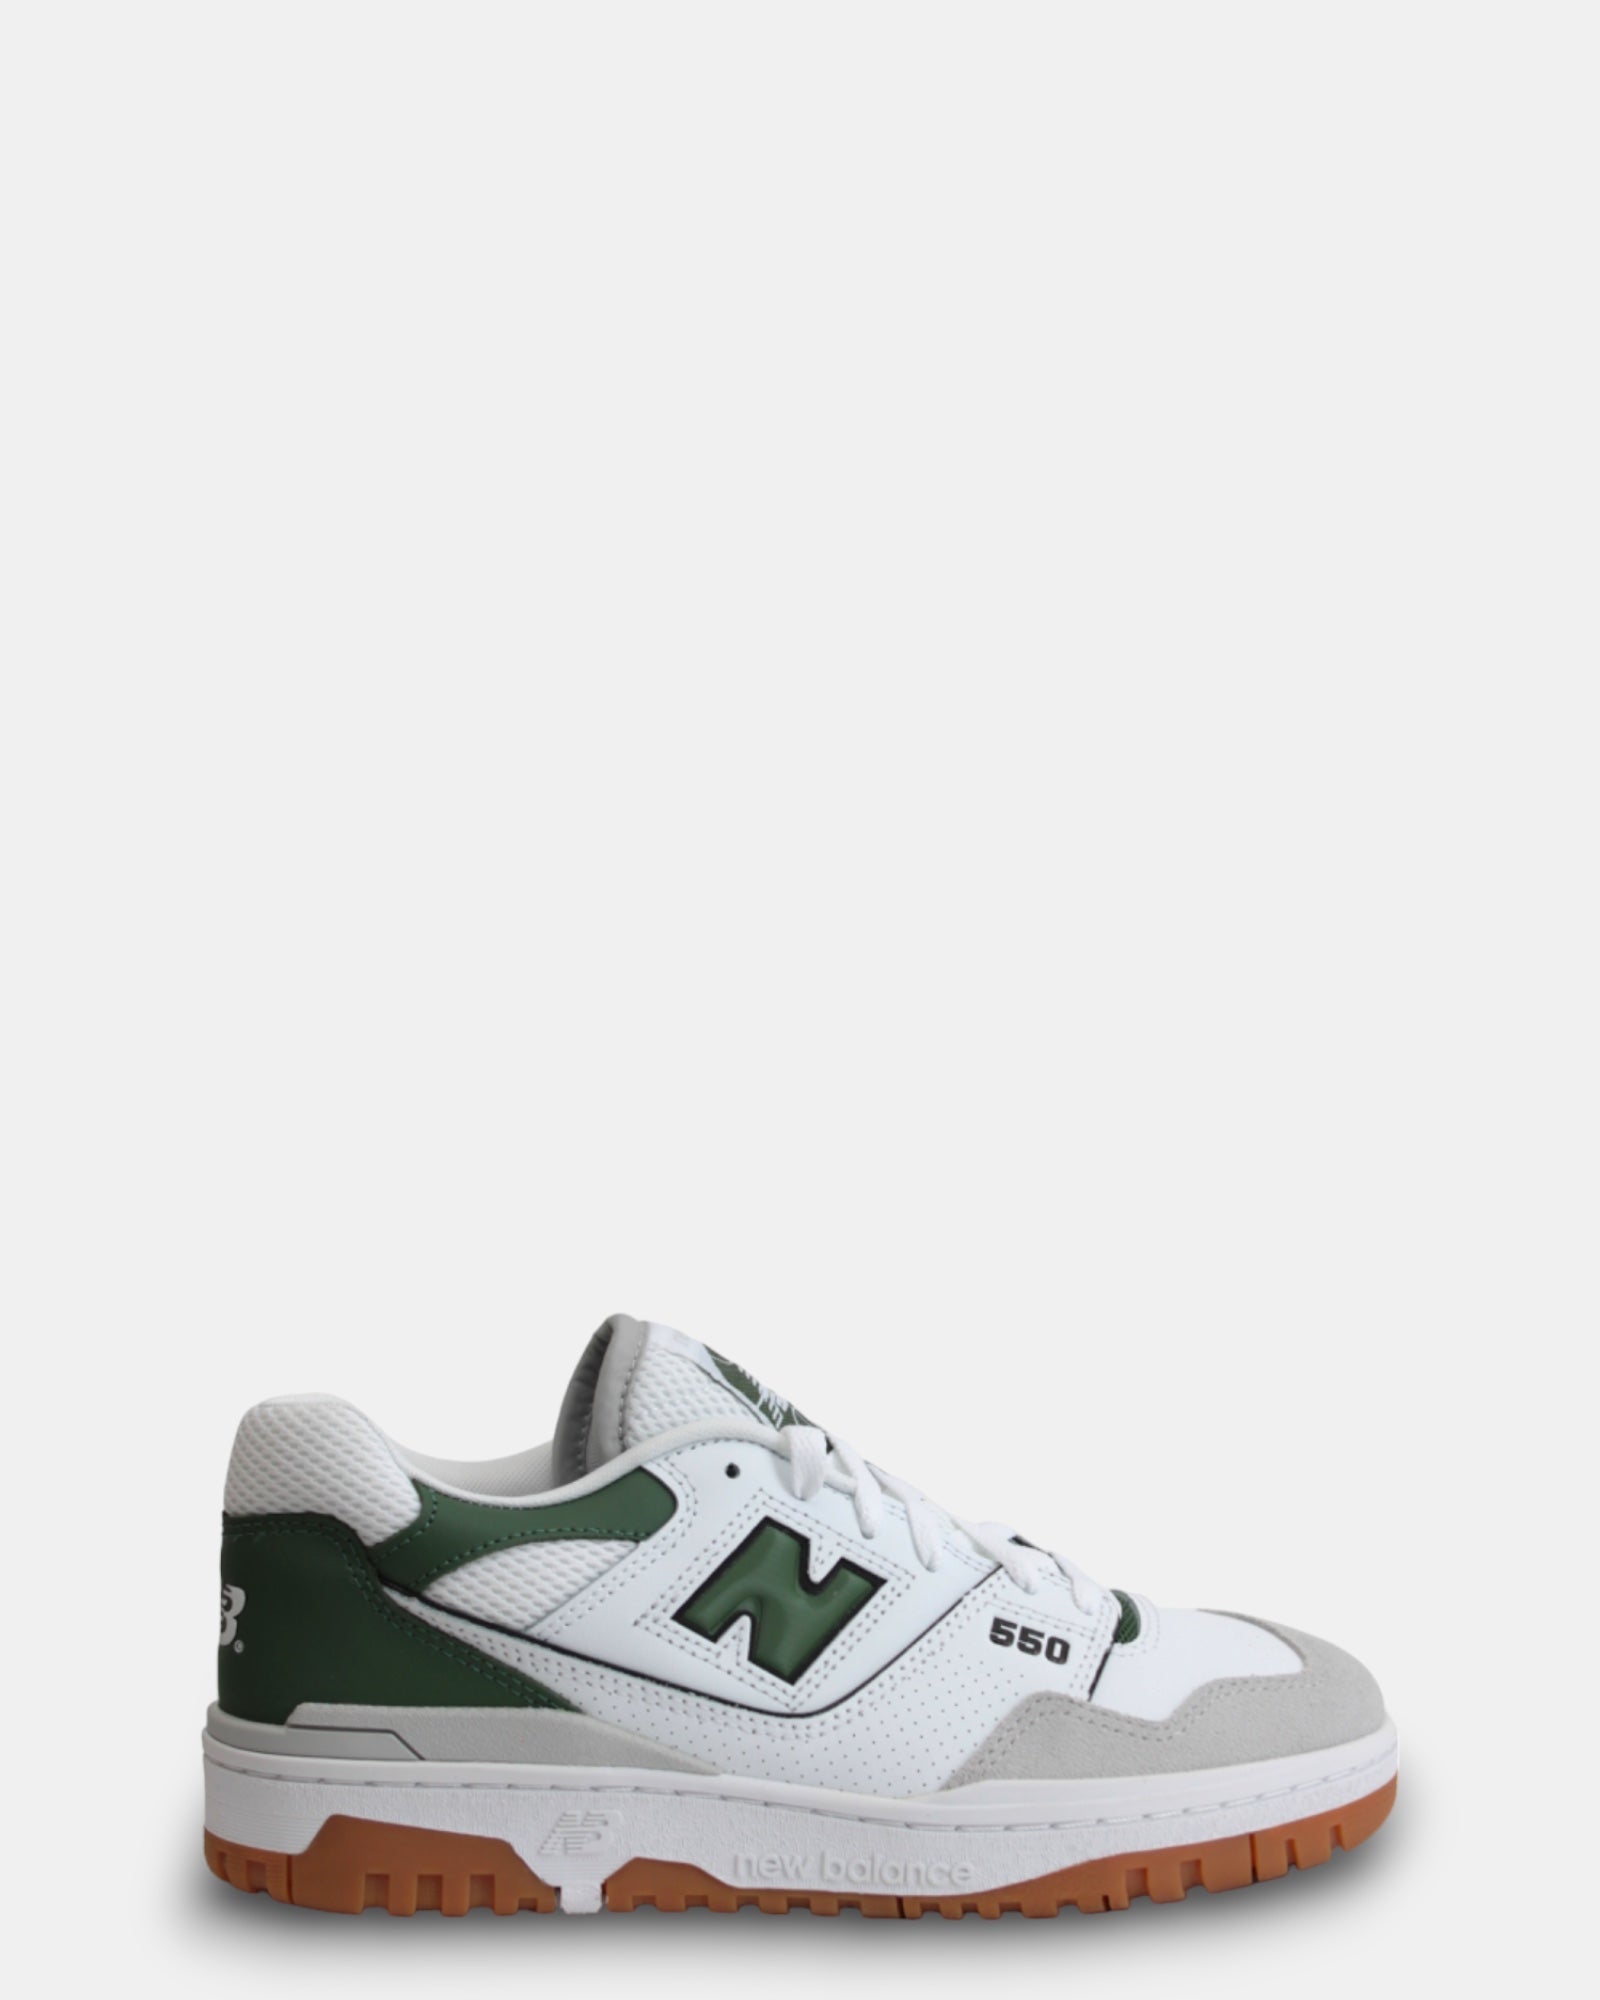 SNEAKERS White/green New Balance